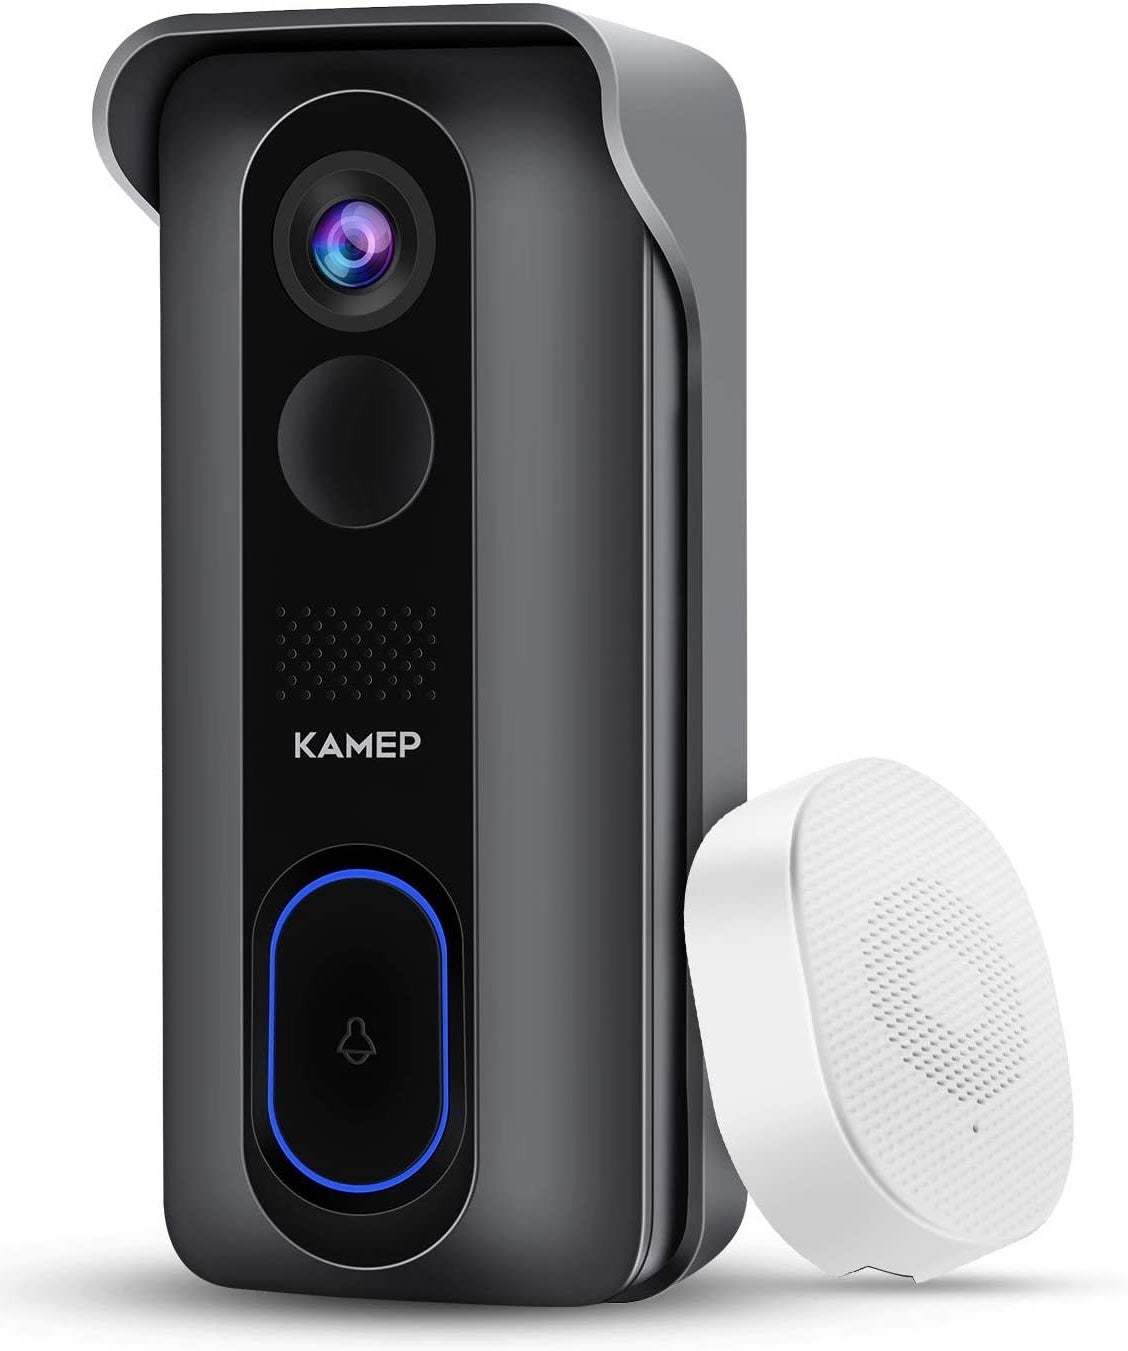 the doorbell camera and speaker on a white background